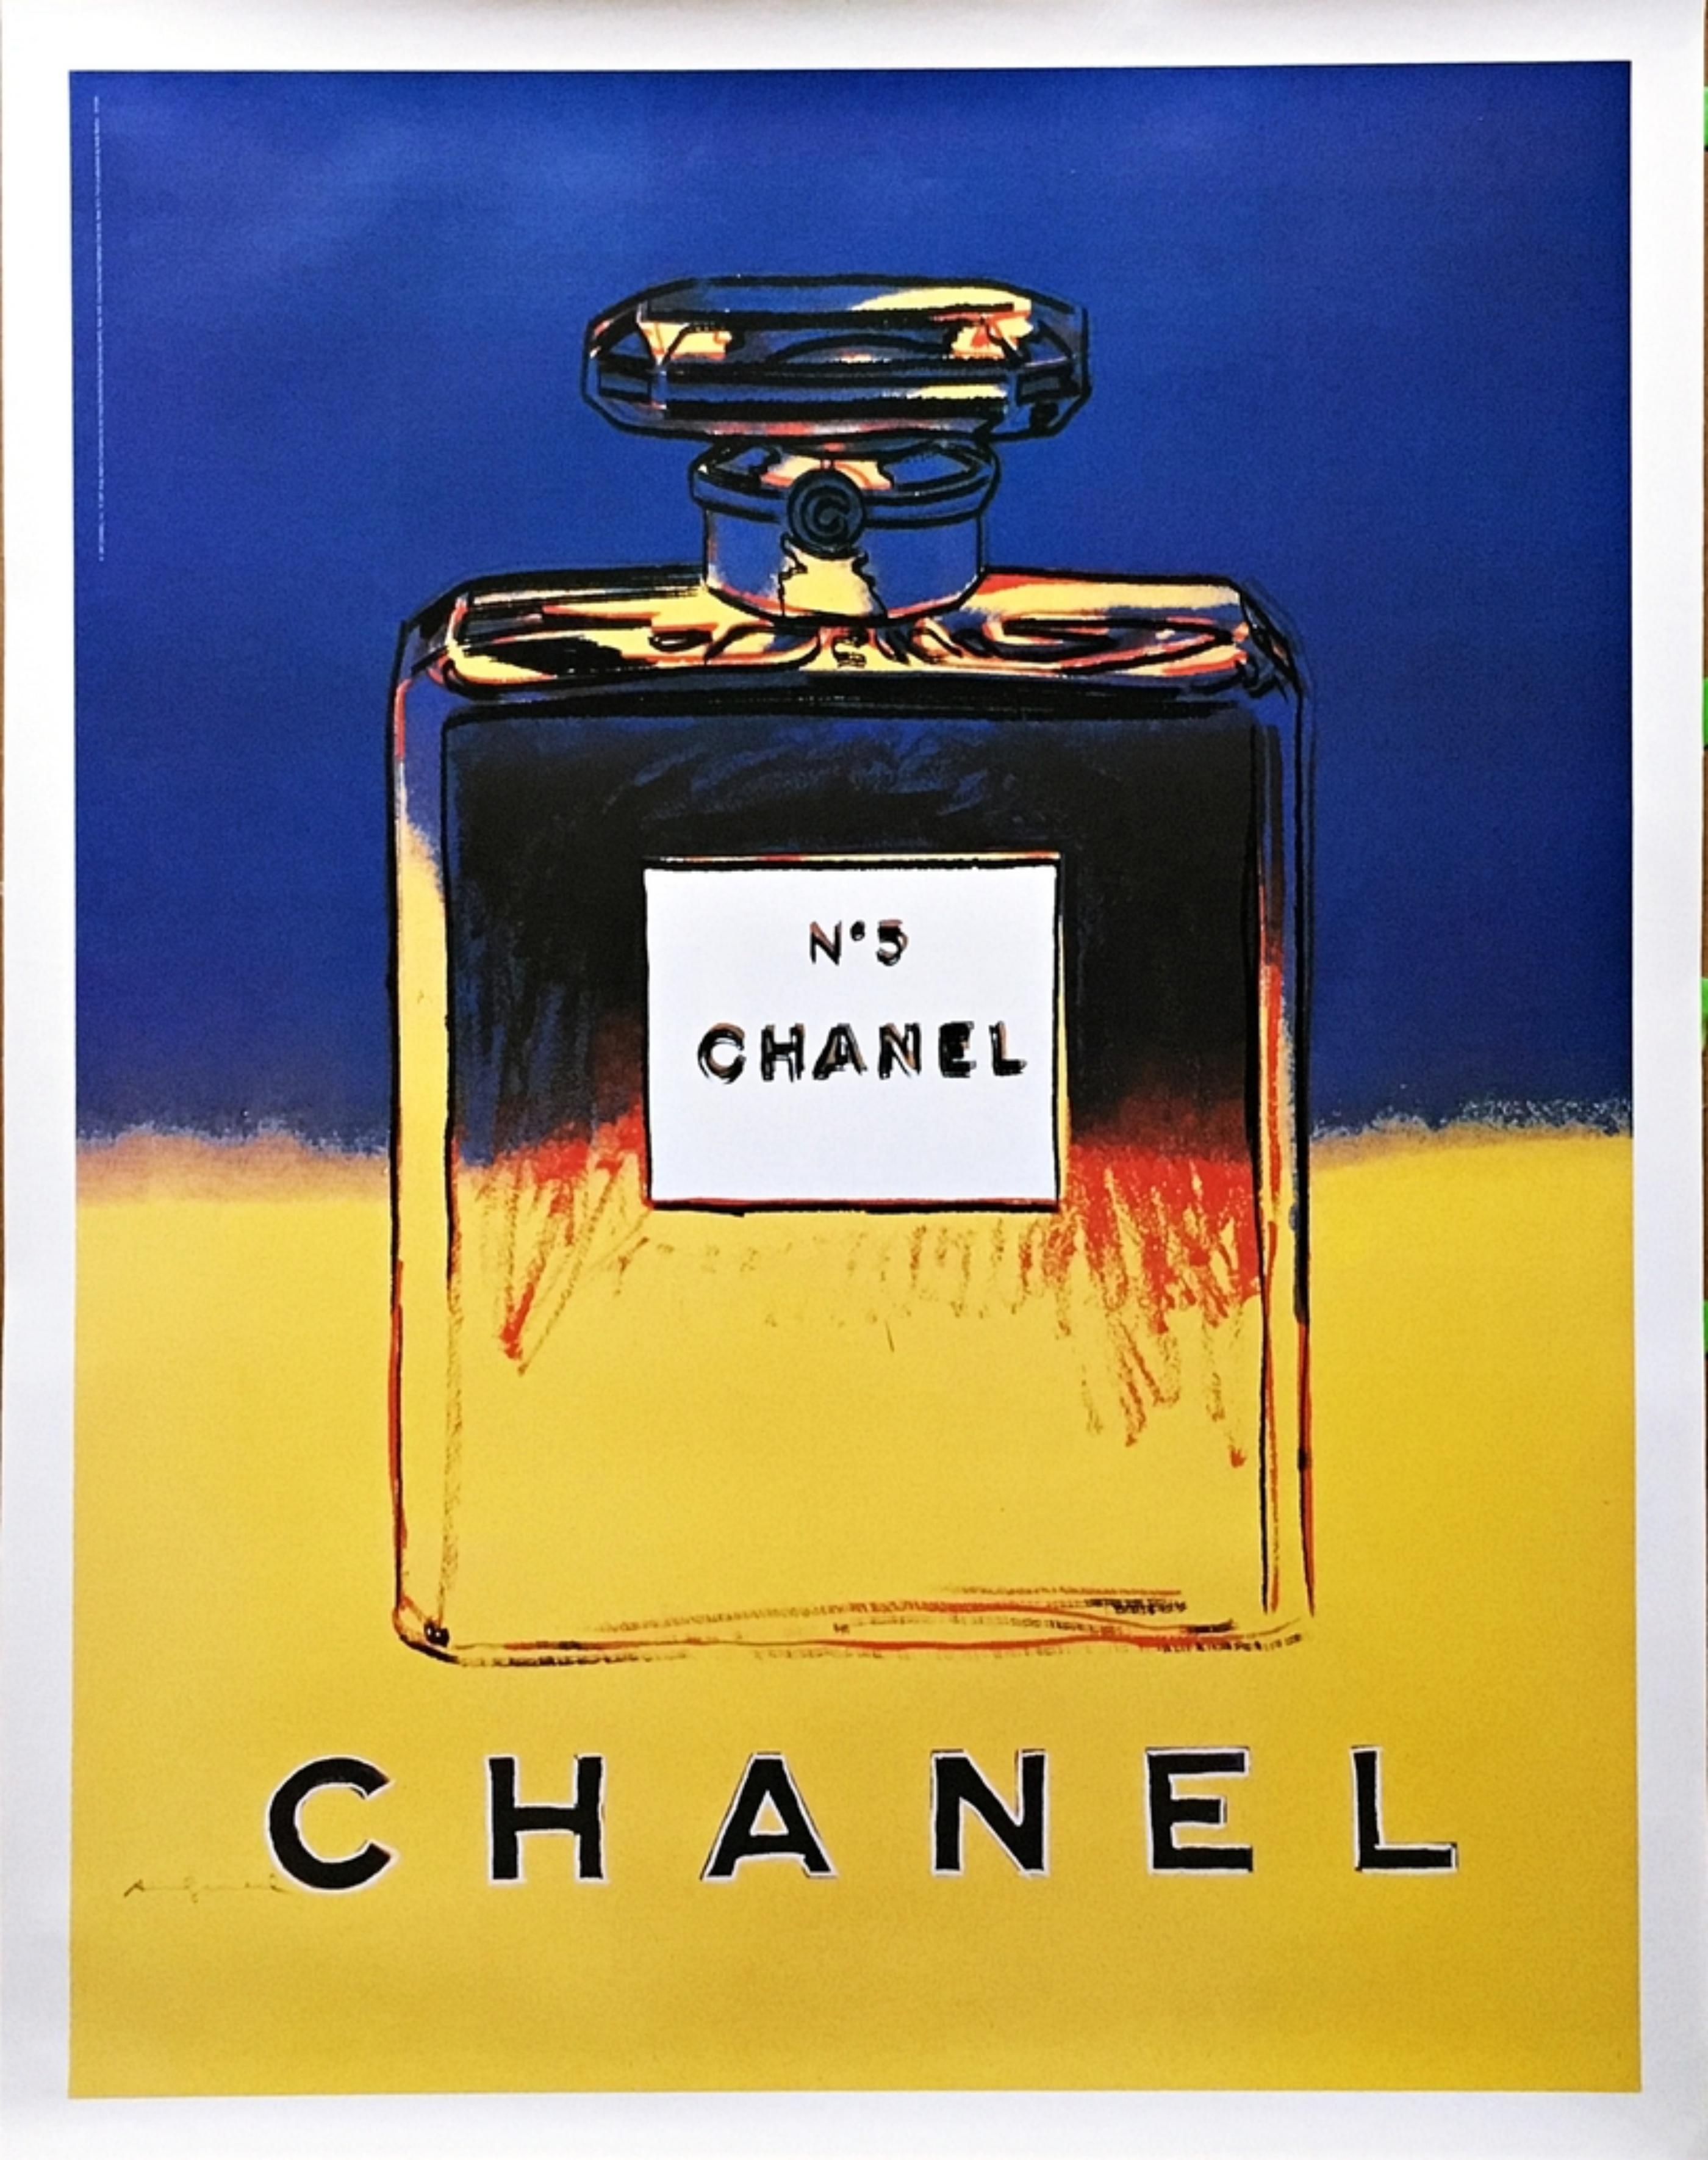 Chanel No. 5 (suite of four (4) separate prints with varnish on linen backing) - Pop Art Print by Andy Warhol